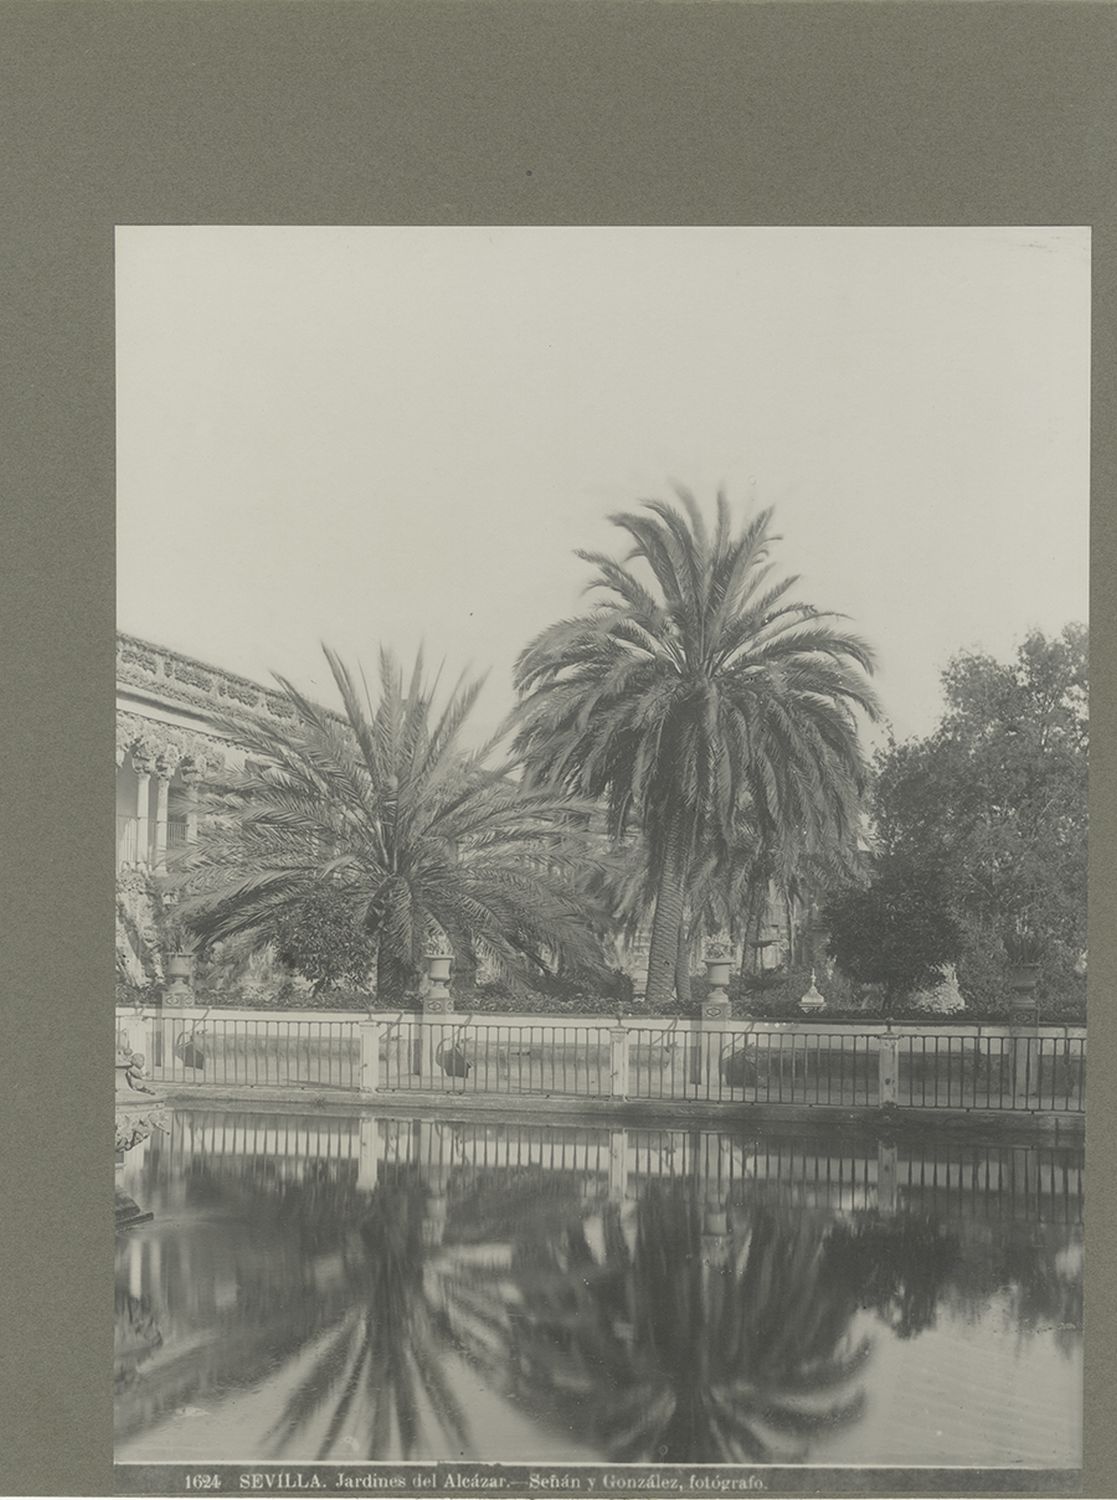 View of pool in gardens.